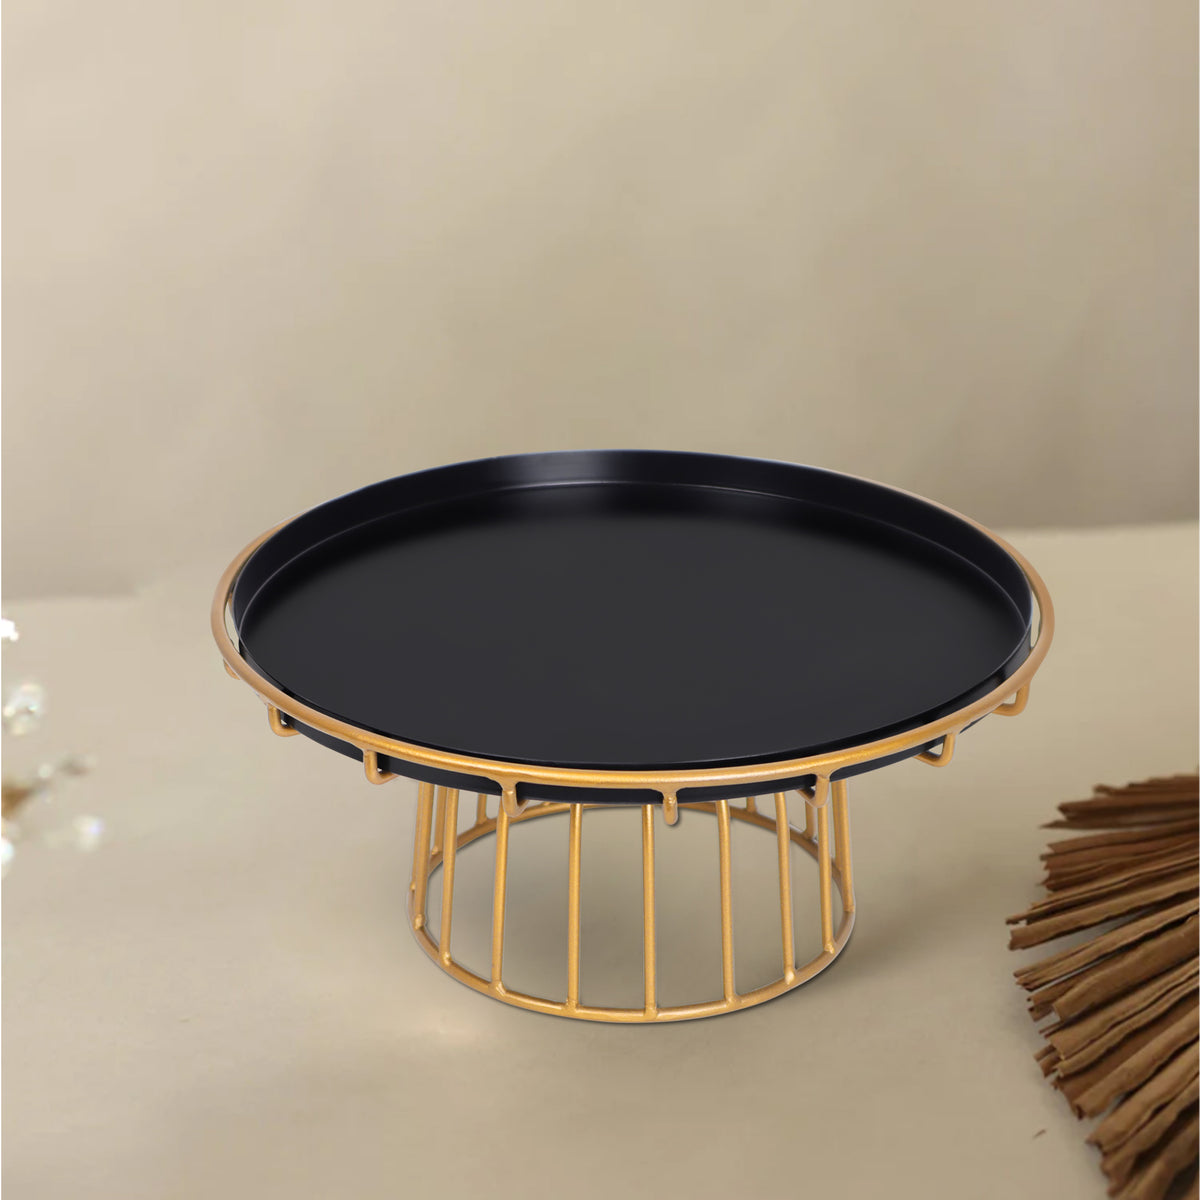 Single Tier Cake Stand, Golden And Black - 10 Inch, Round